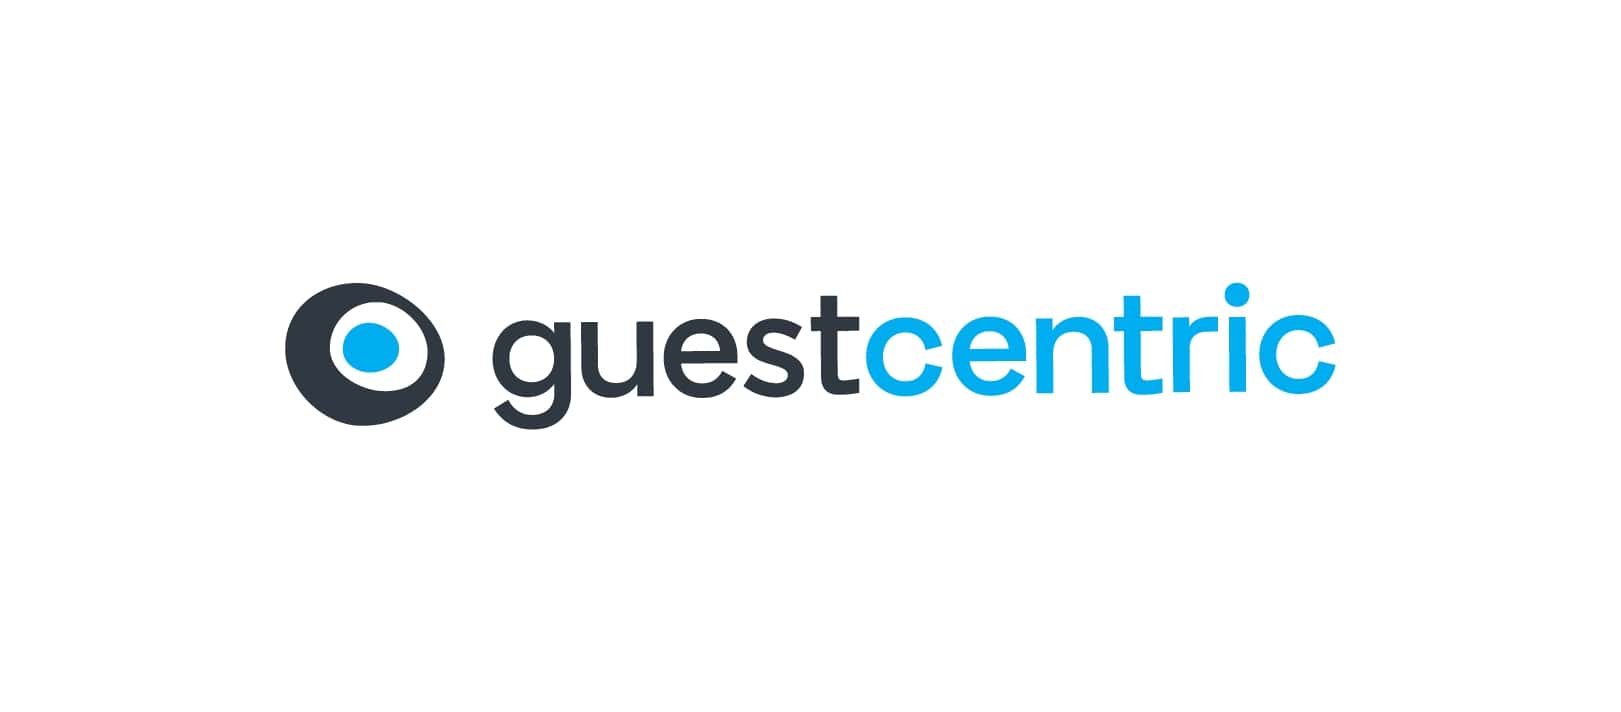 GuestCentric